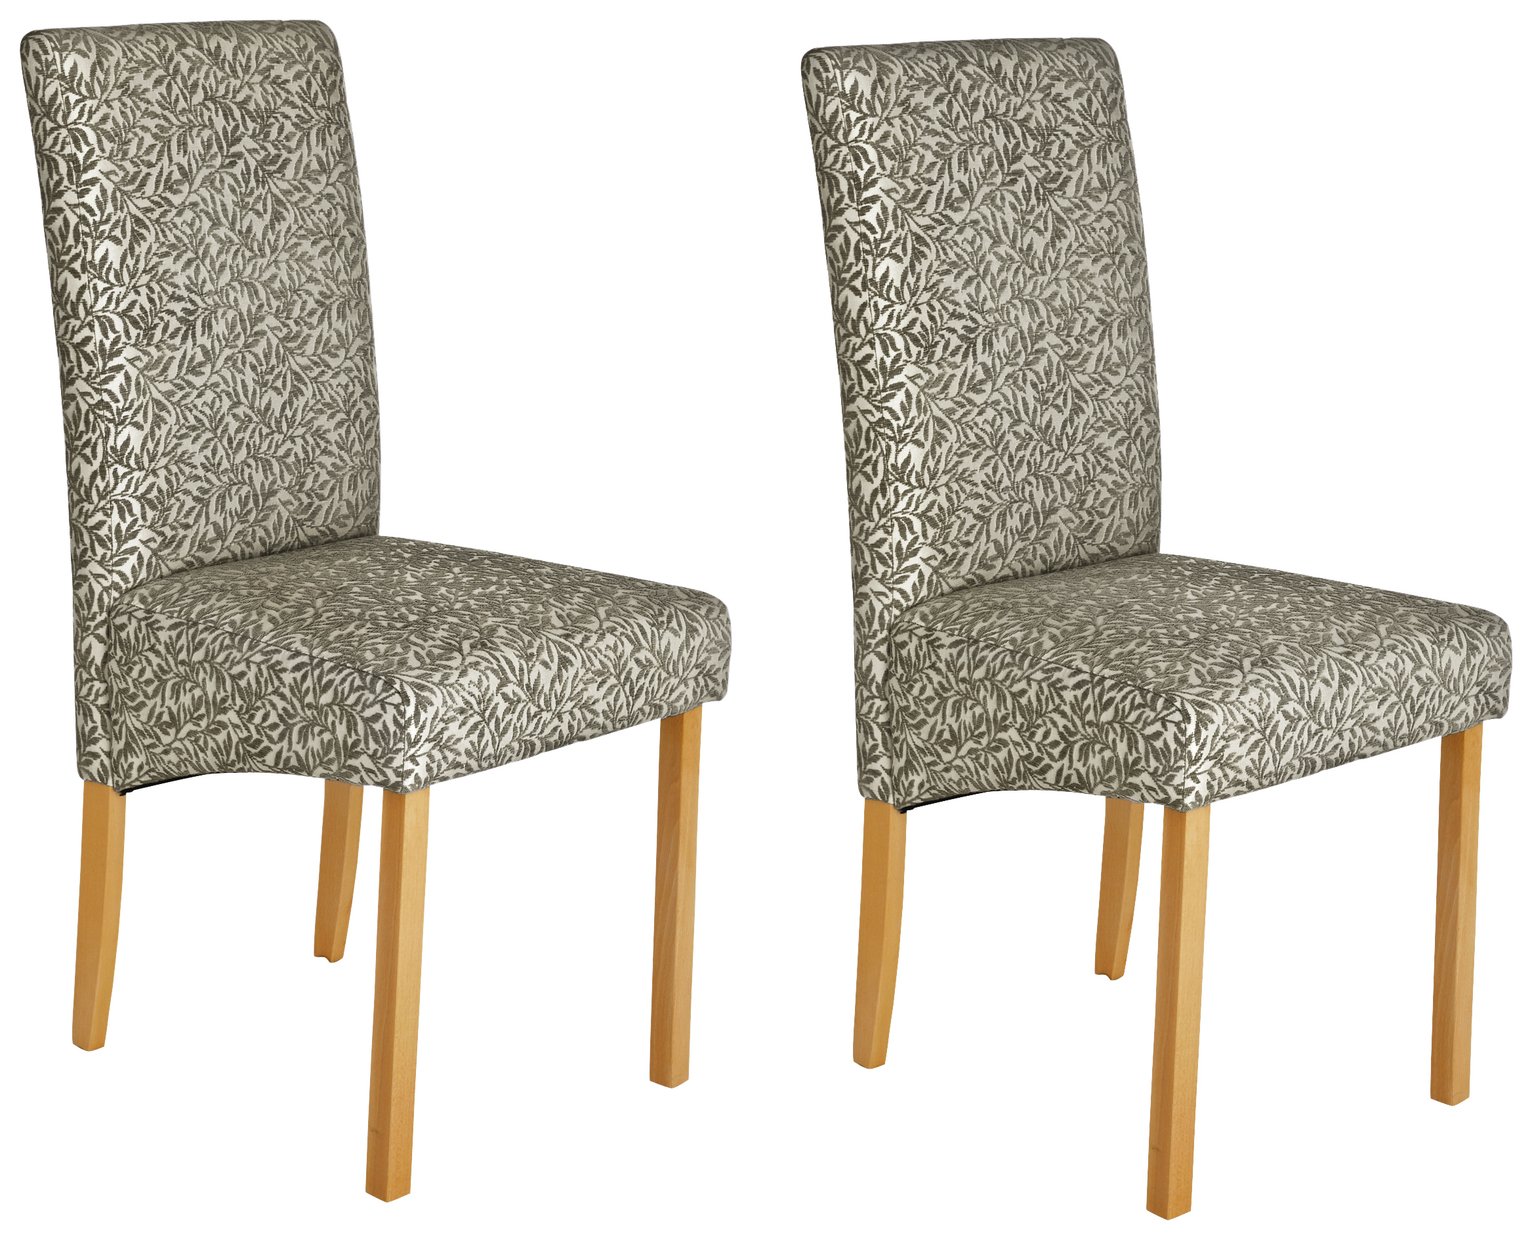 Argos Home Pair Of Fabric Skirted Dining Chairs Floral 2458605 Argos Price Tracker Pricehistory Co Uk